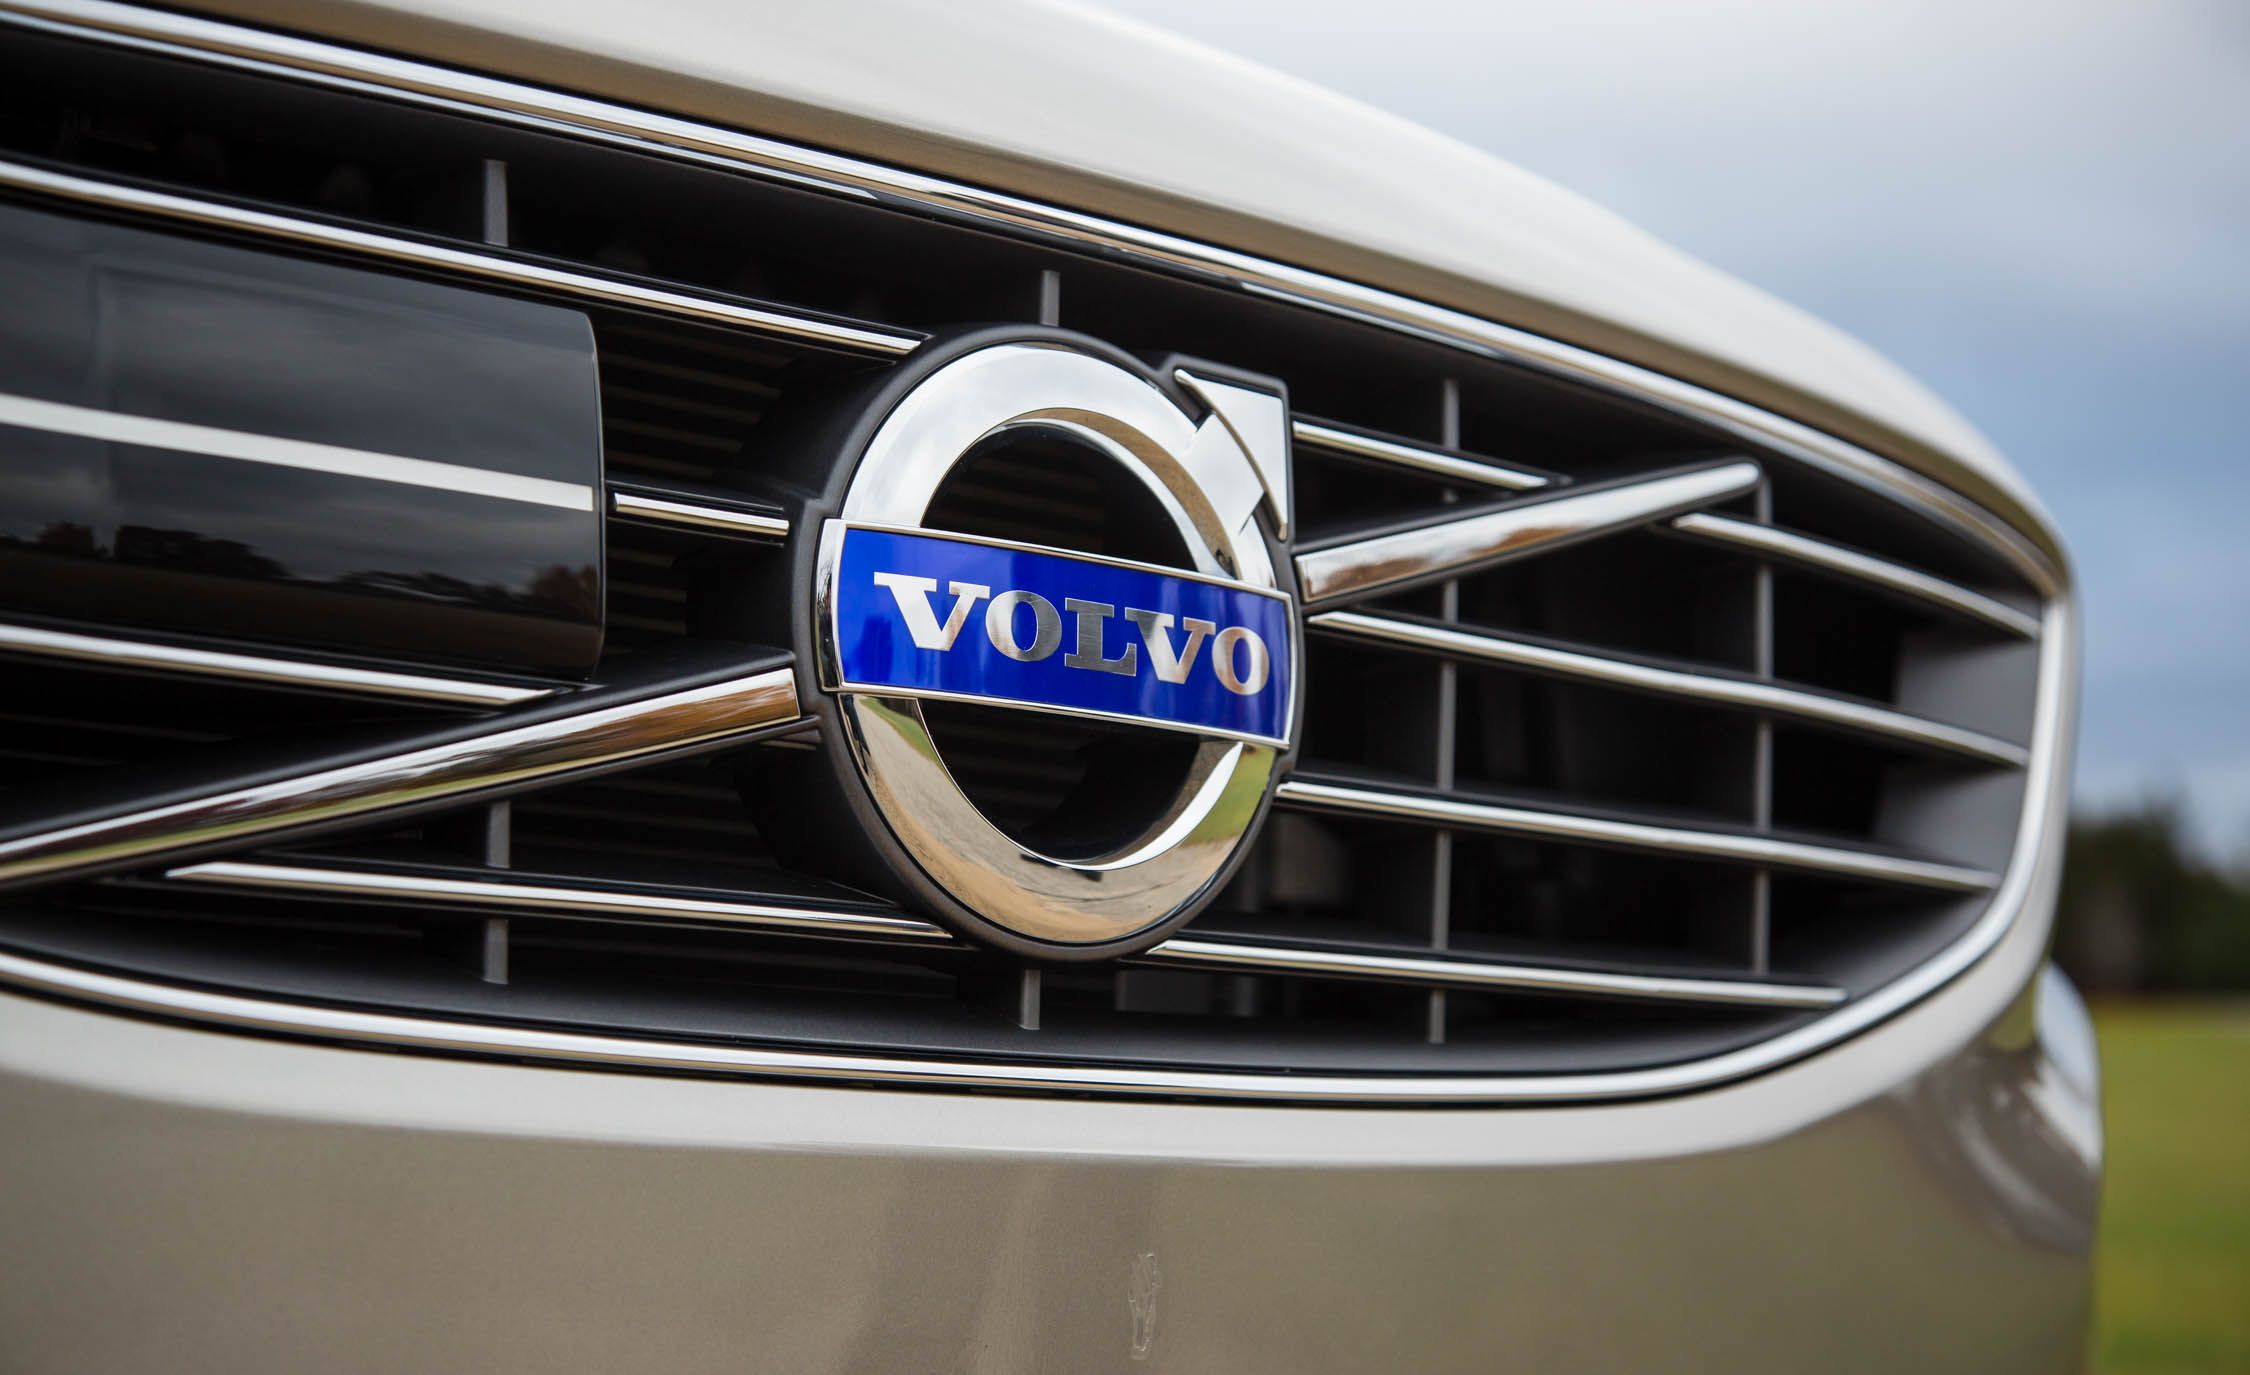 2016 Volvo S60 T5 Inscription Exterior Badge Front (View 13 of 28)